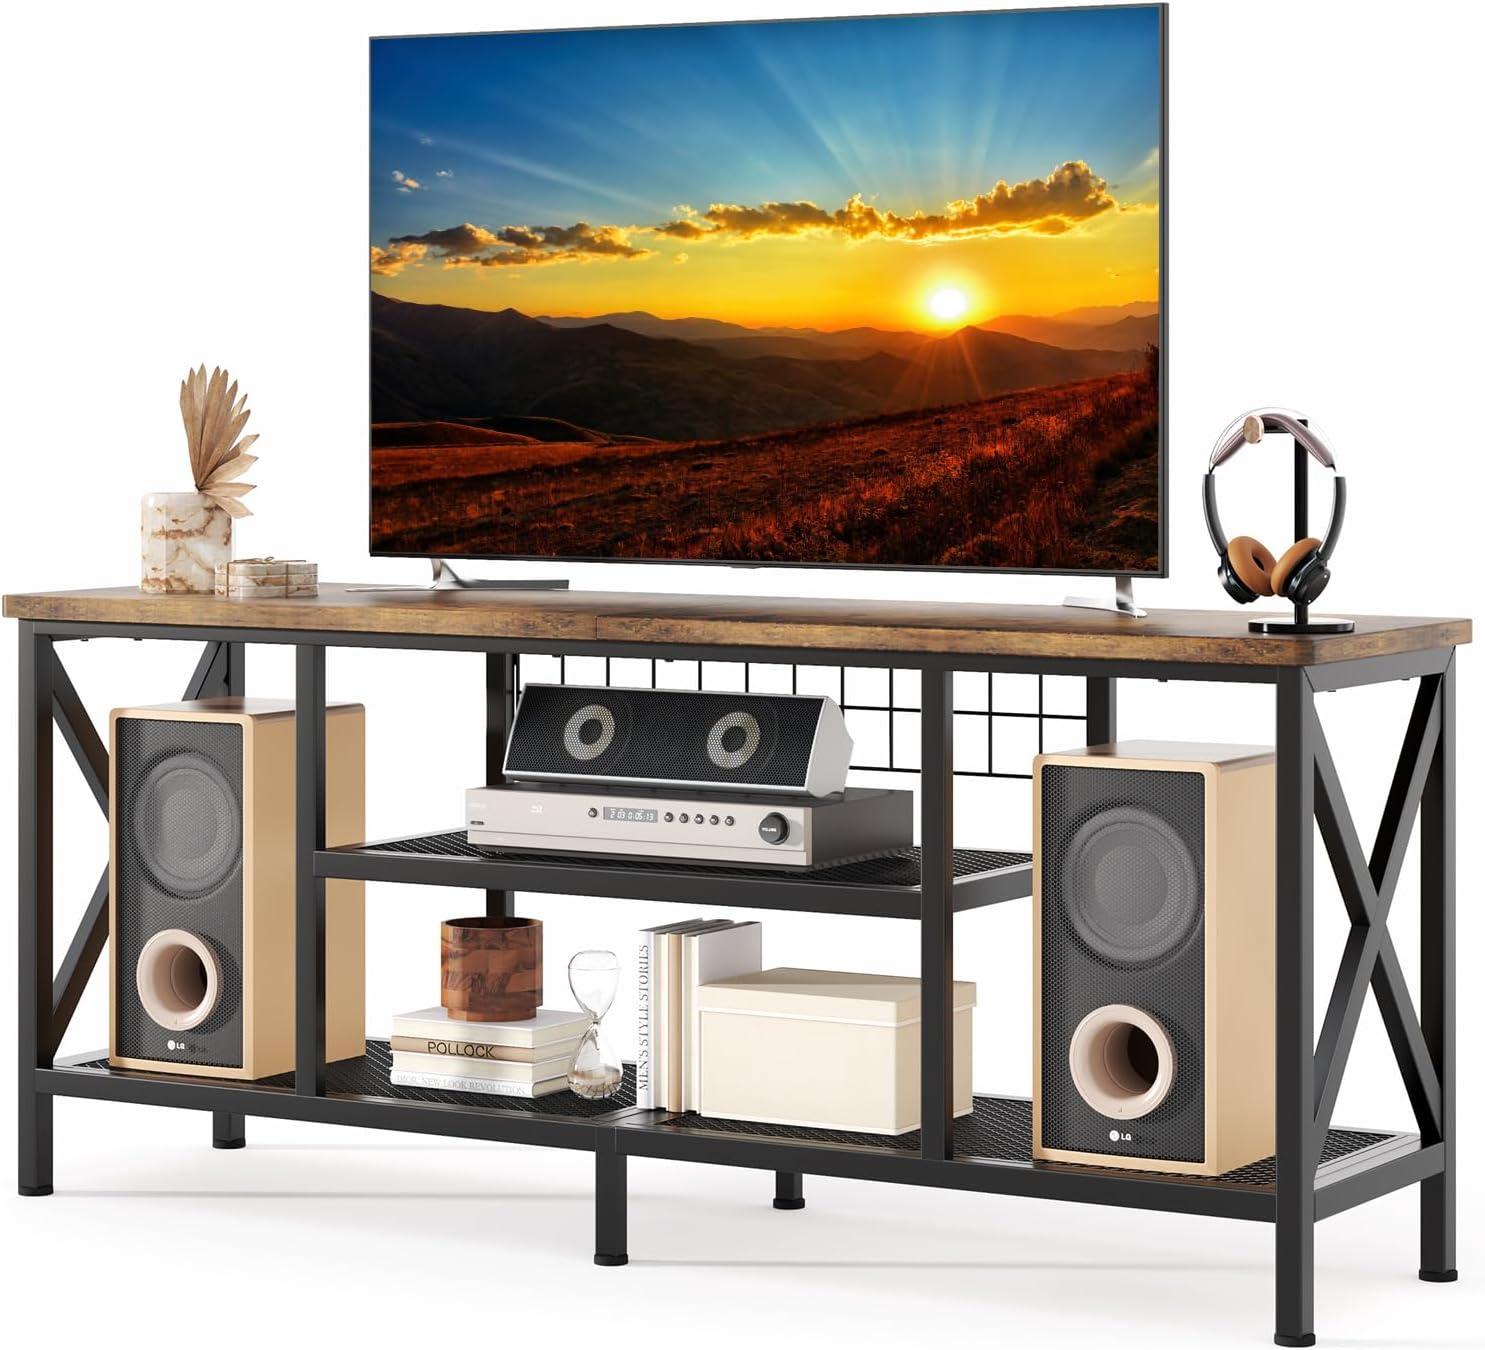 I looked for sometime before finally settling on this TV stand our LG 65 fits awesome and it is so sturdy with no sagging. Also was easy to put together